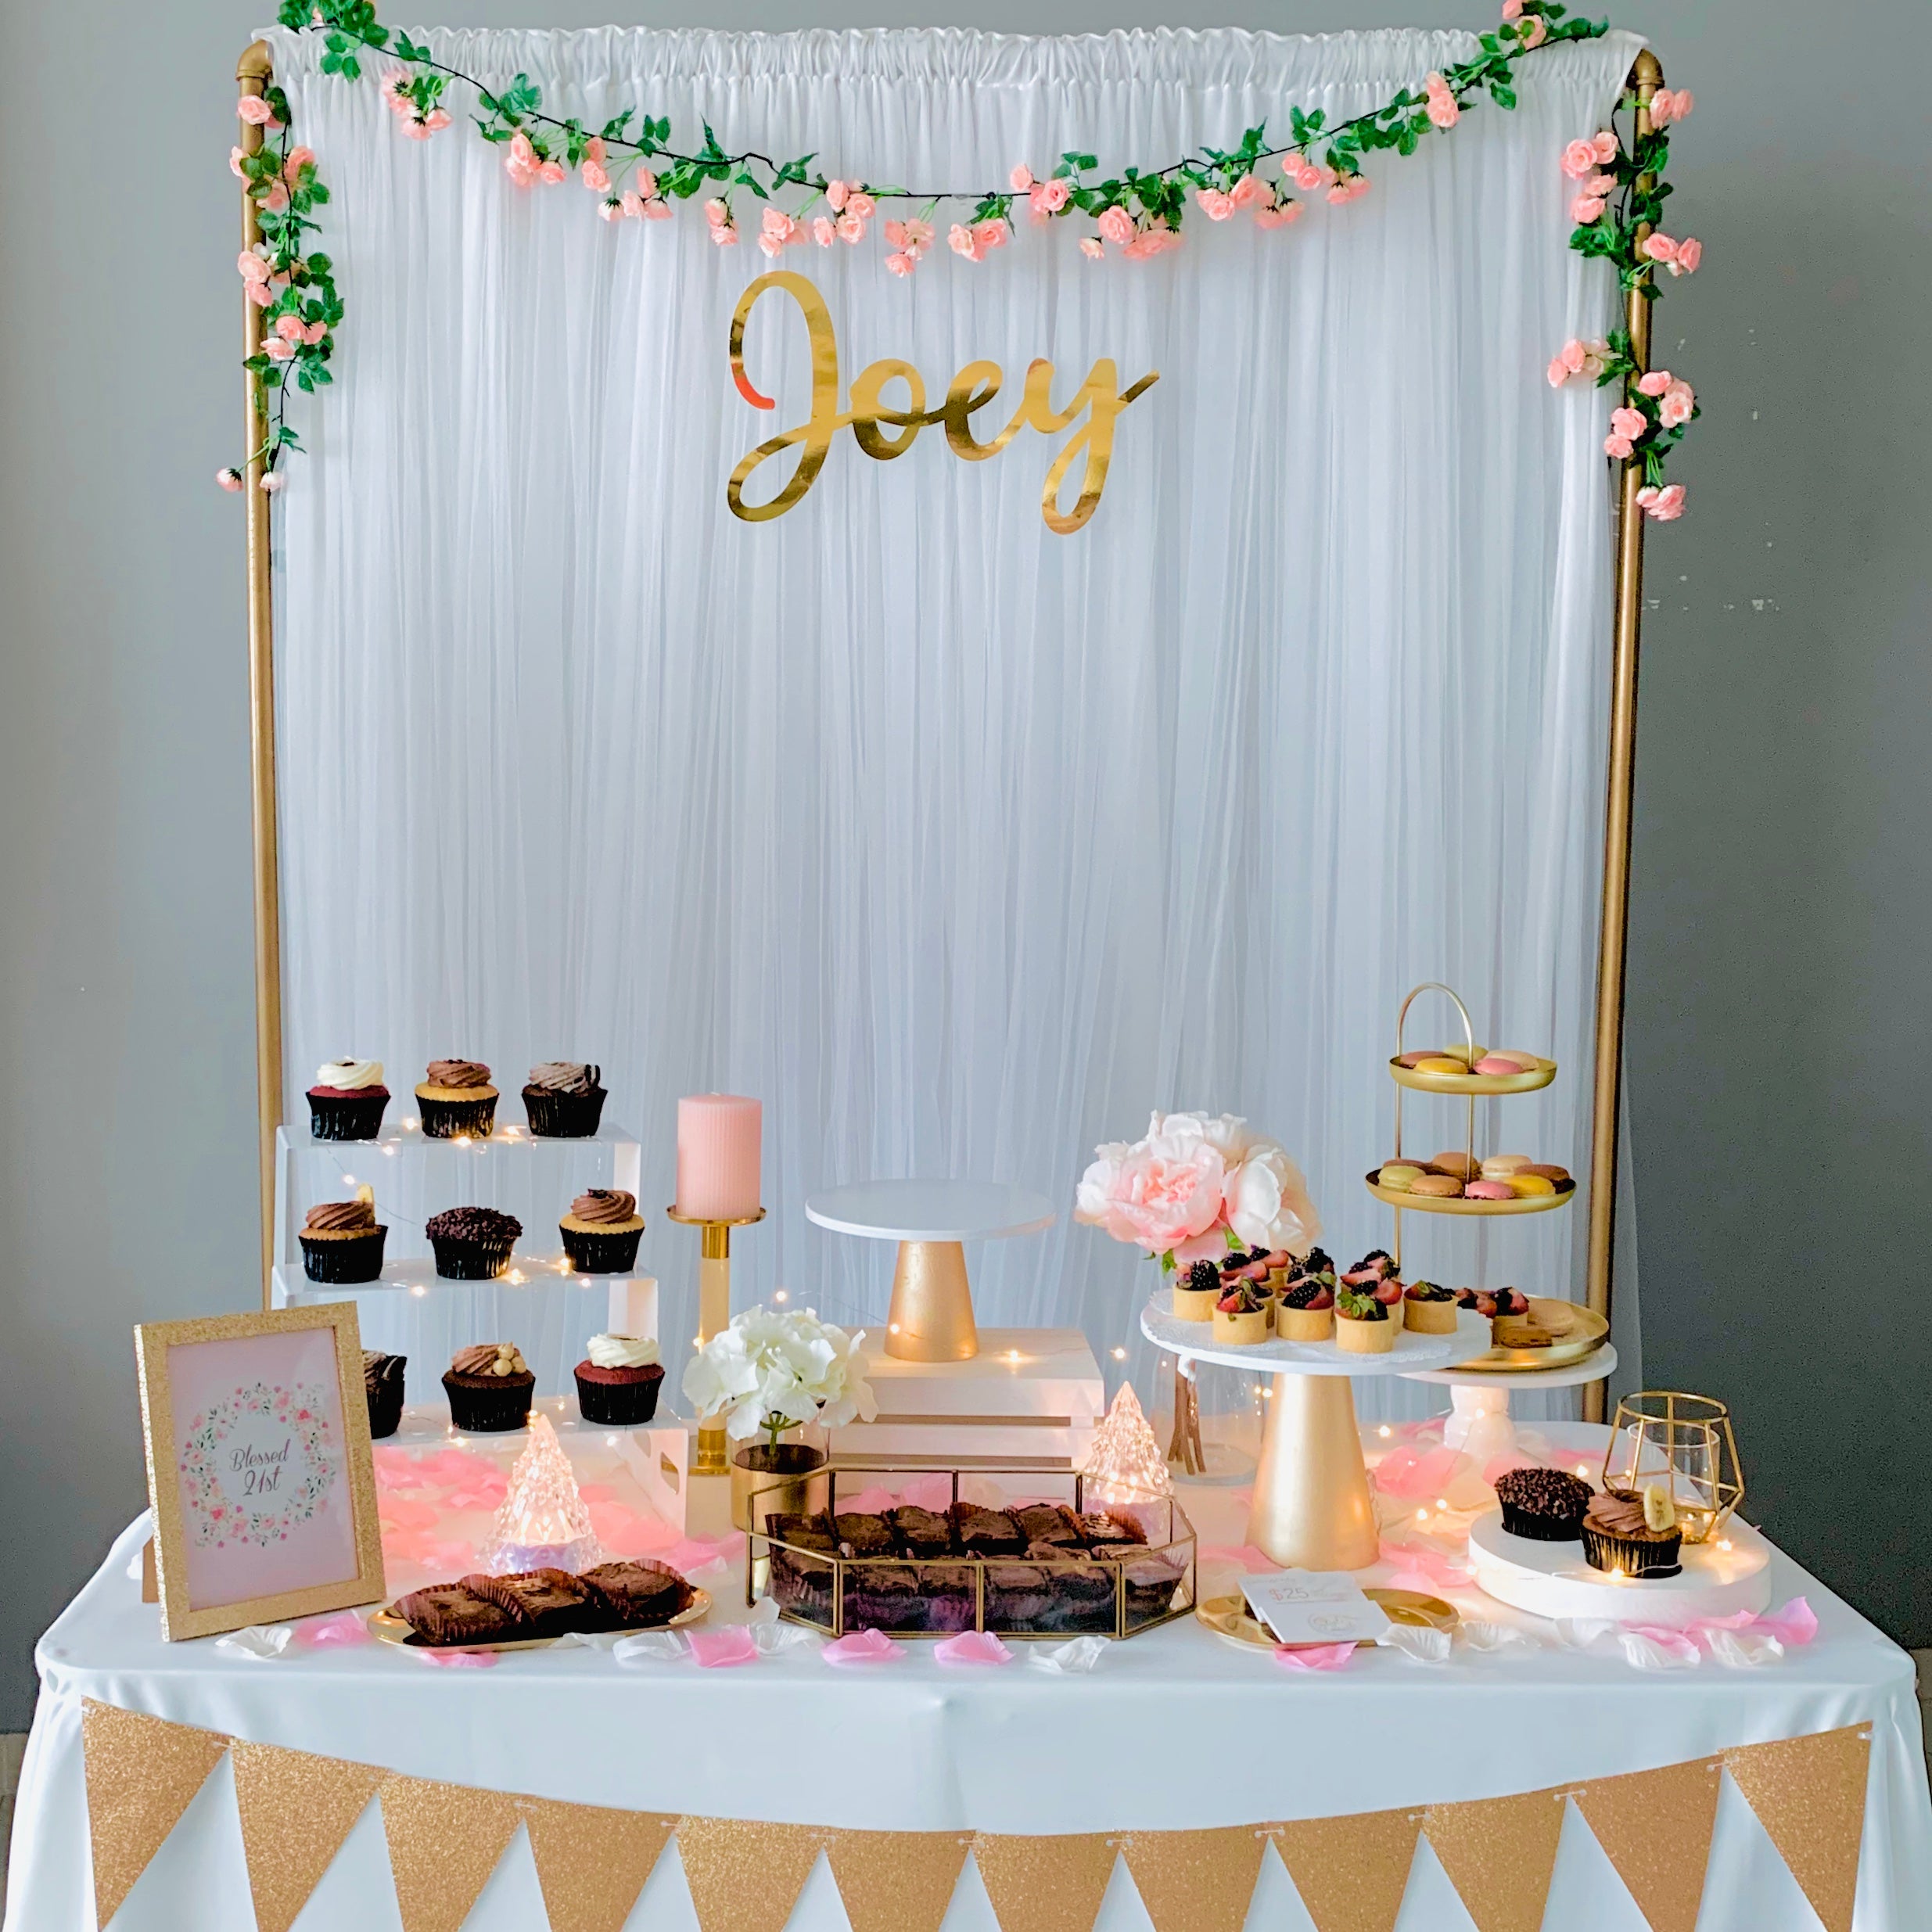 Sweet Romance Dessert Table (Classic White, Gold, Blush) for Birthday Party by Style It Simply